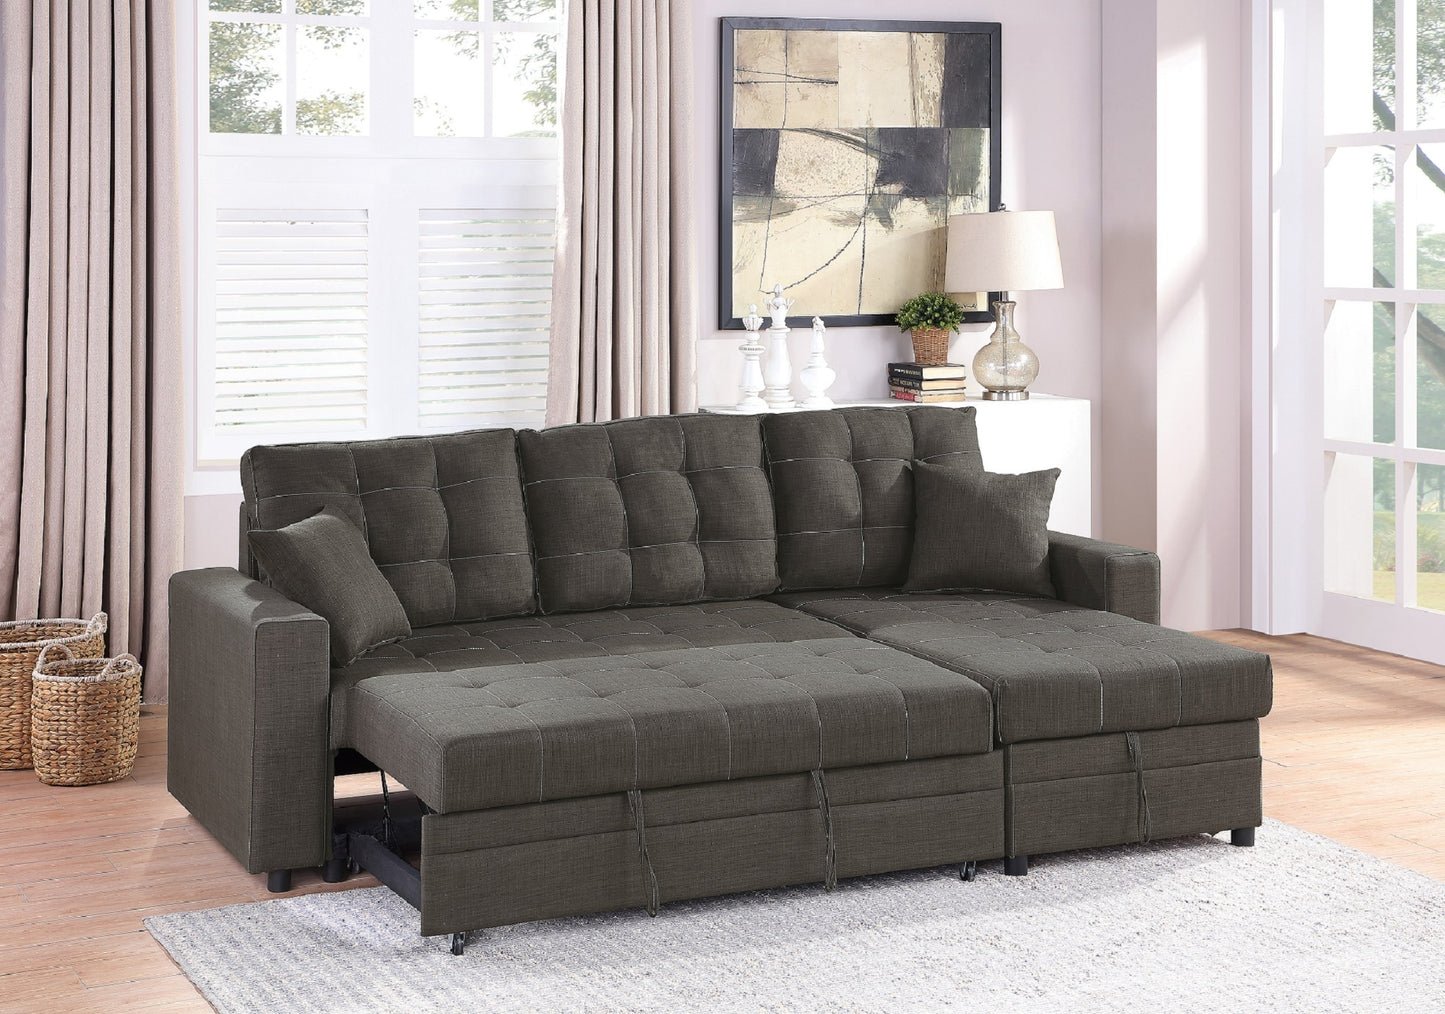 Convertible Sectional Pull Out Bed Sofa Chaise with Reversible Storage, Ash Black Polyfiber Tufted Couch Lounge - Various Sizes Available